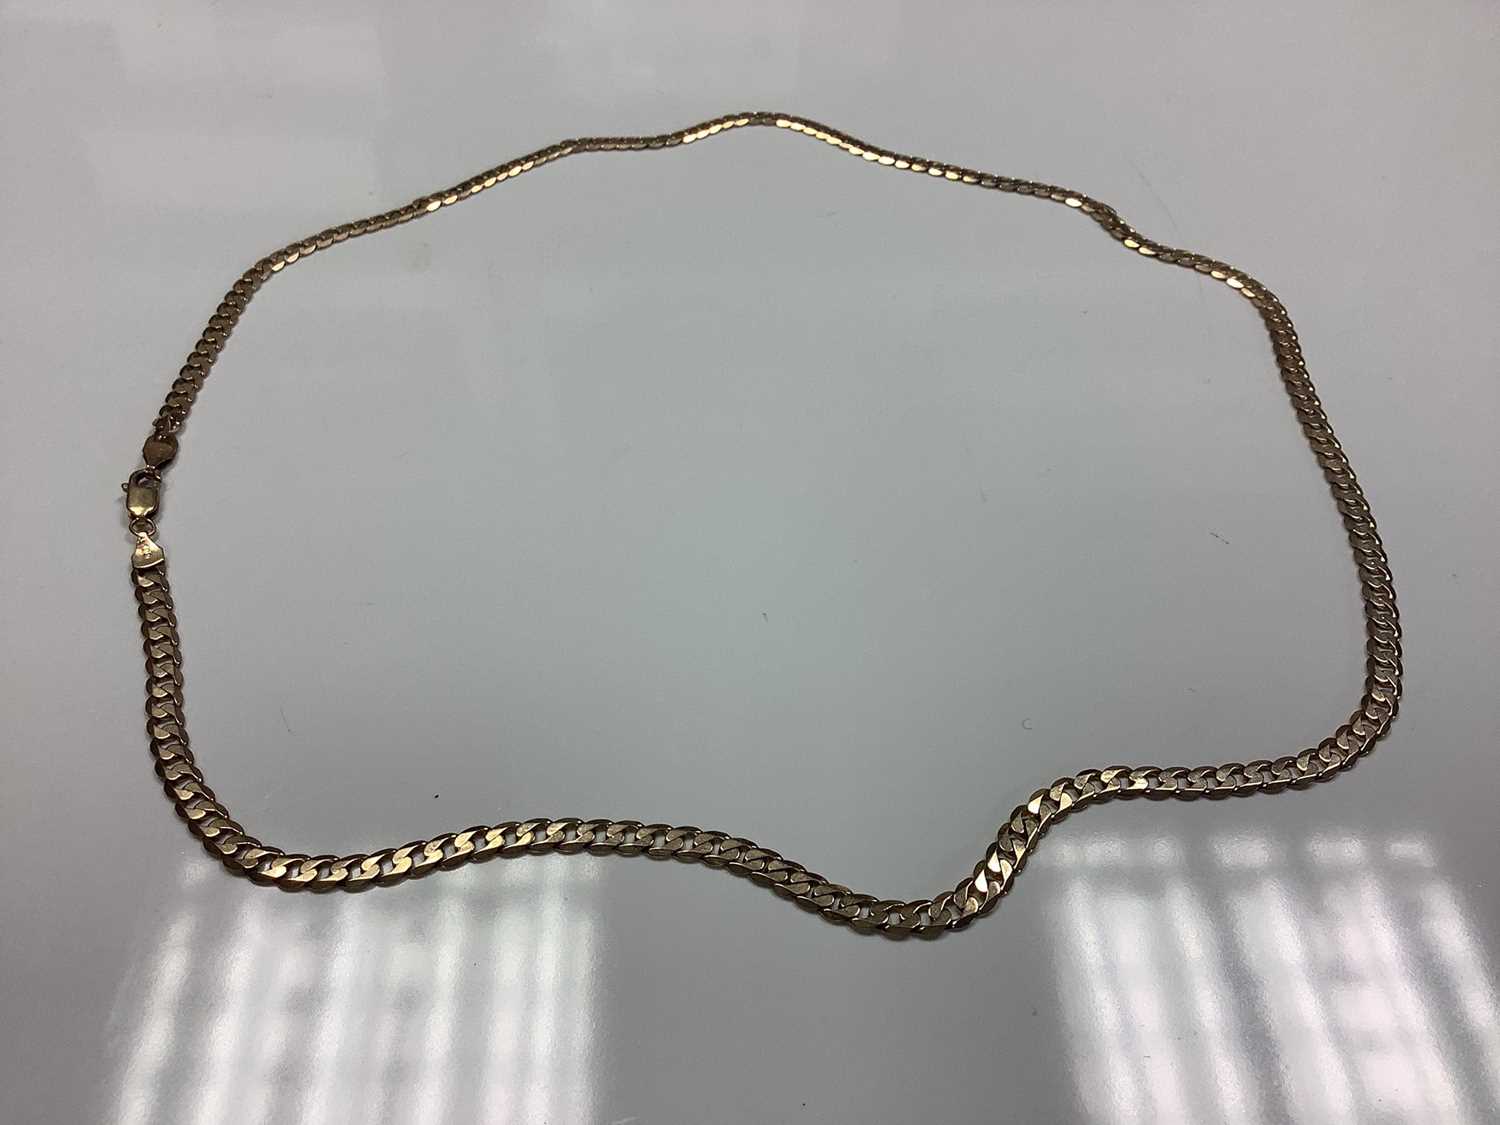 9ct gold rope twist chain/necklace, together with another 9ct chain and a third 9ct chain with a mat - Image 3 of 4